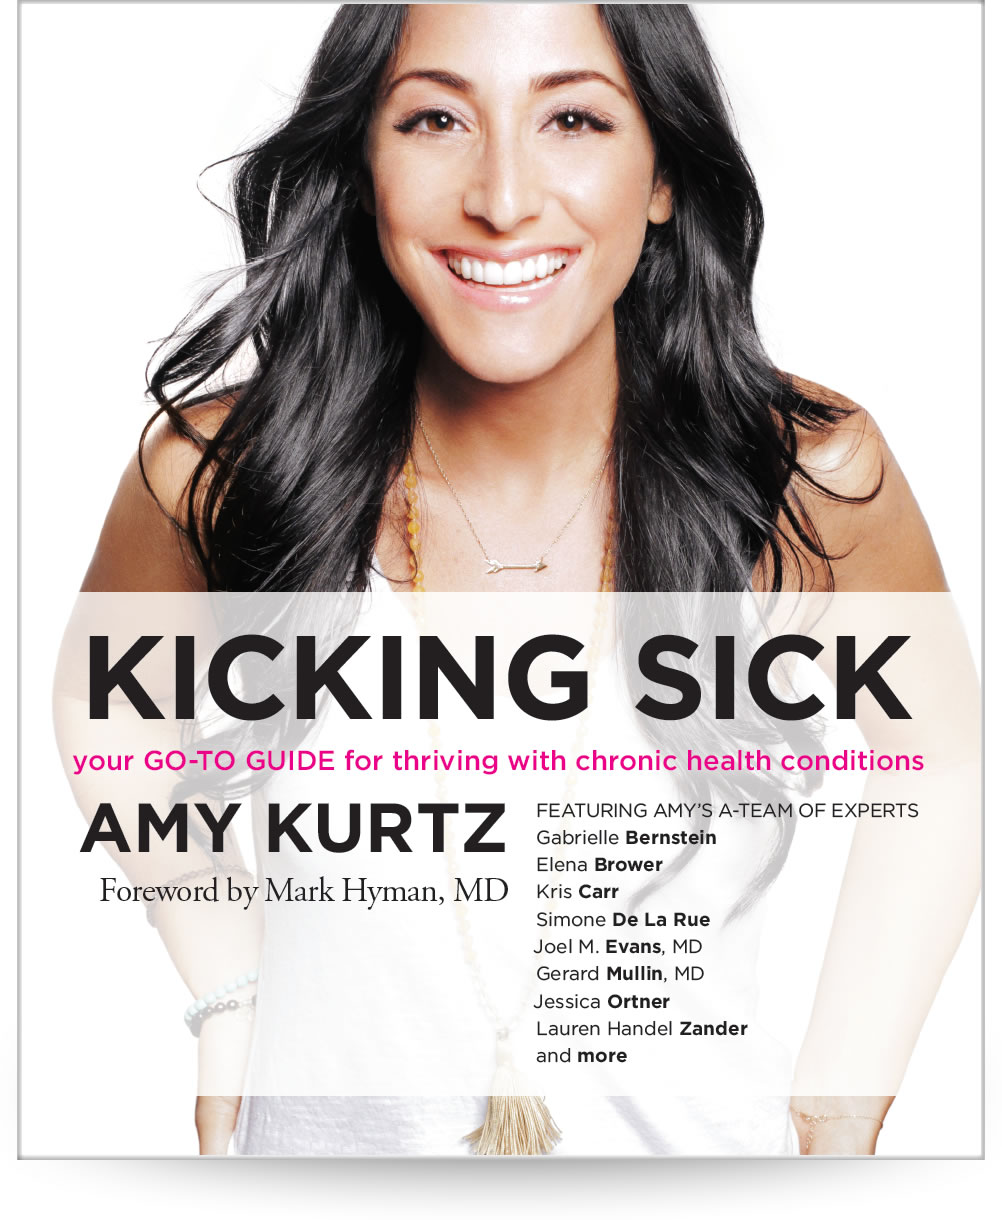 Kicking Sick: Your go-to guide for thriving with chronic health conditions by Amy Kurtz